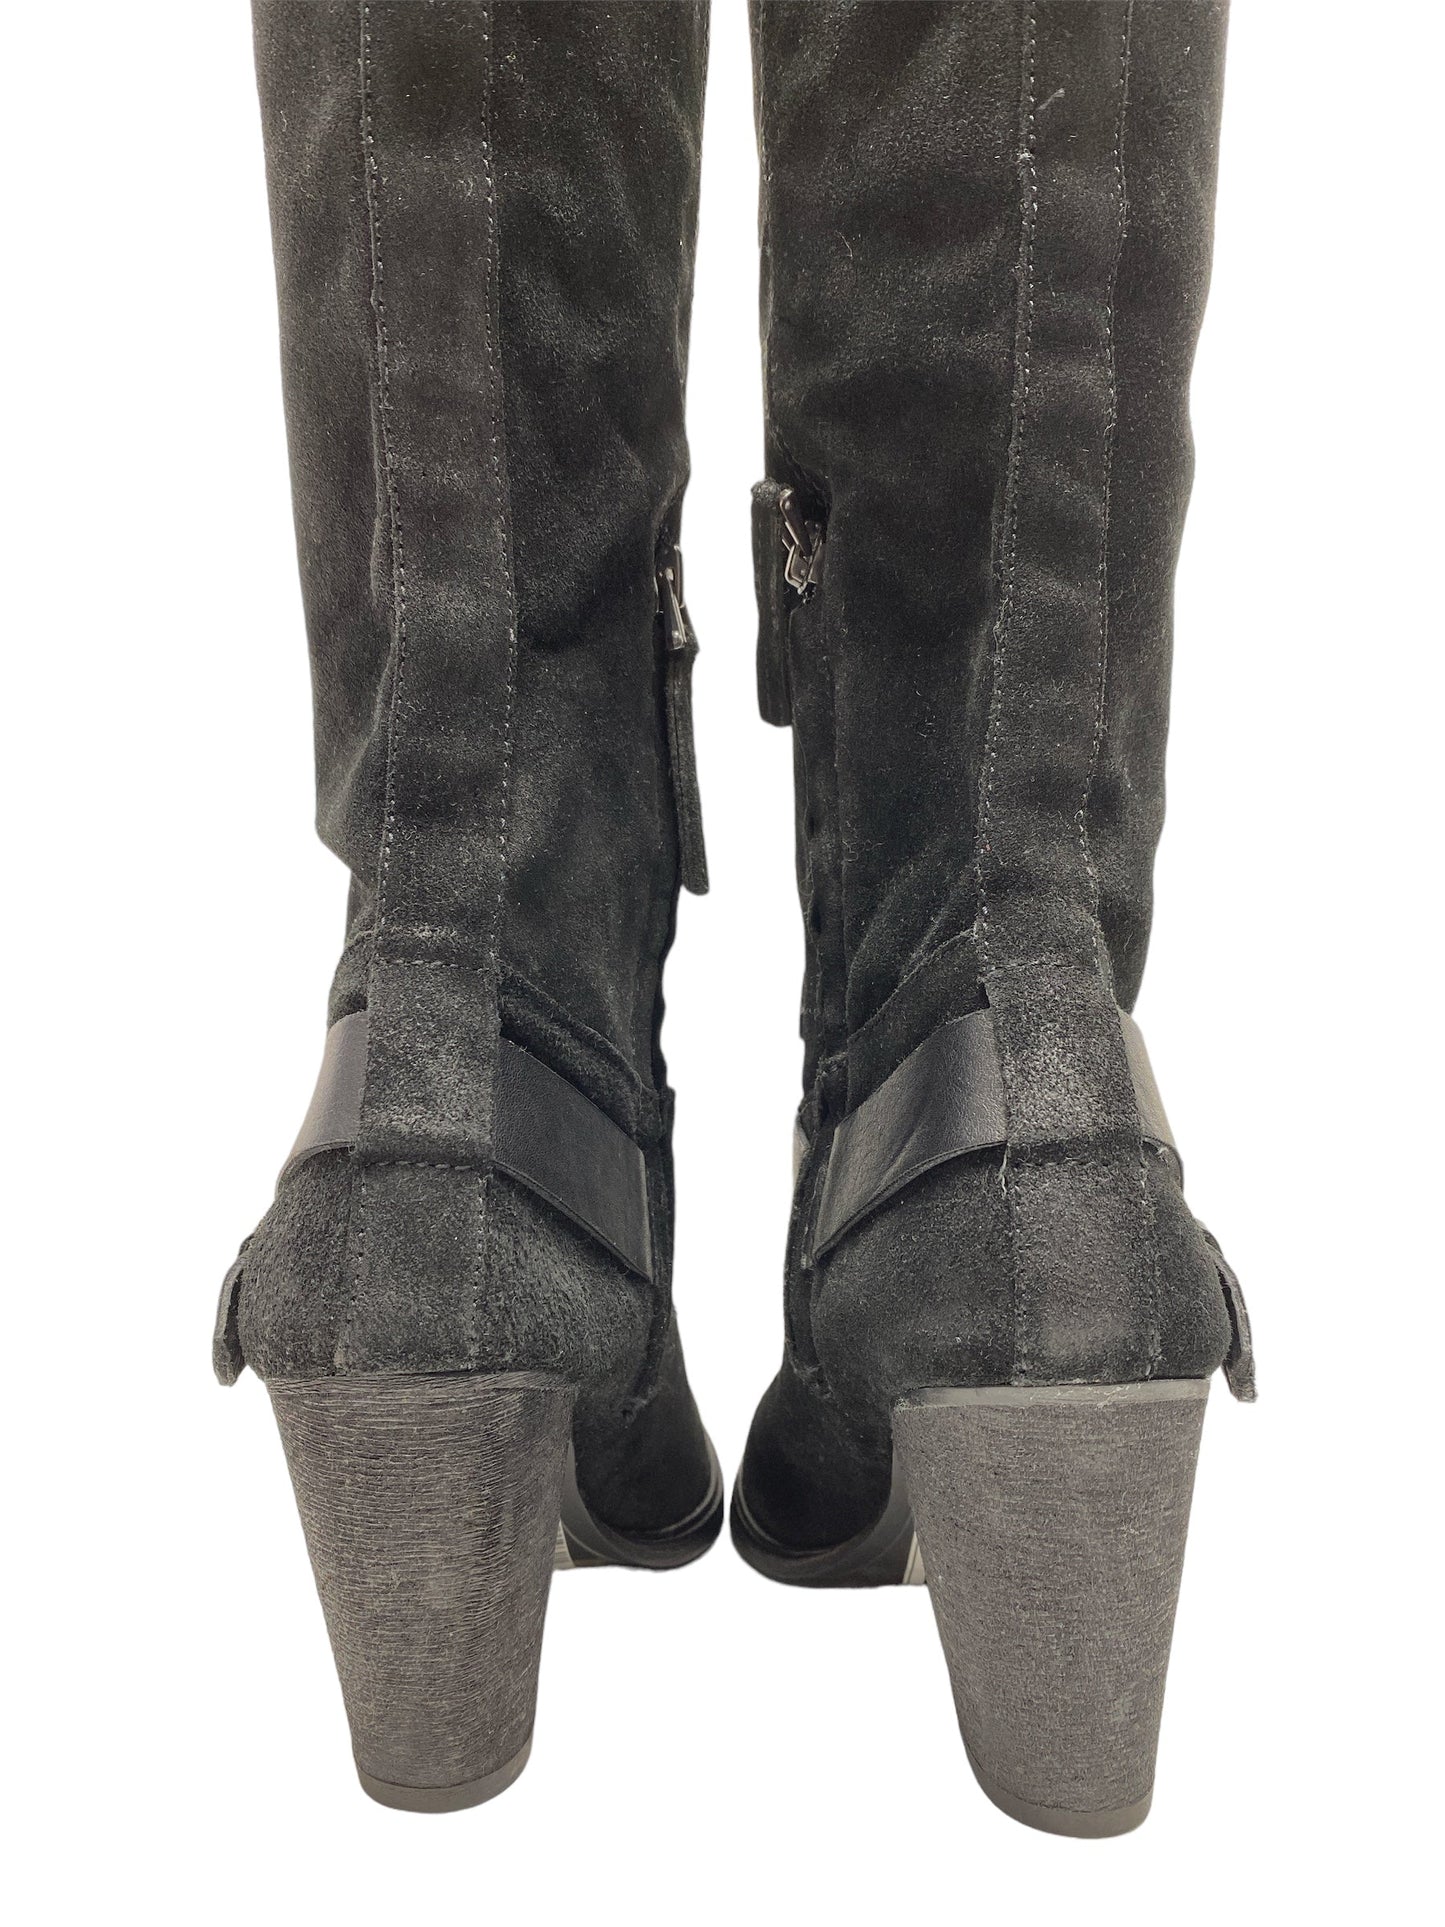 Boots Knee Heels By Dolce Vita  Size: 8.5